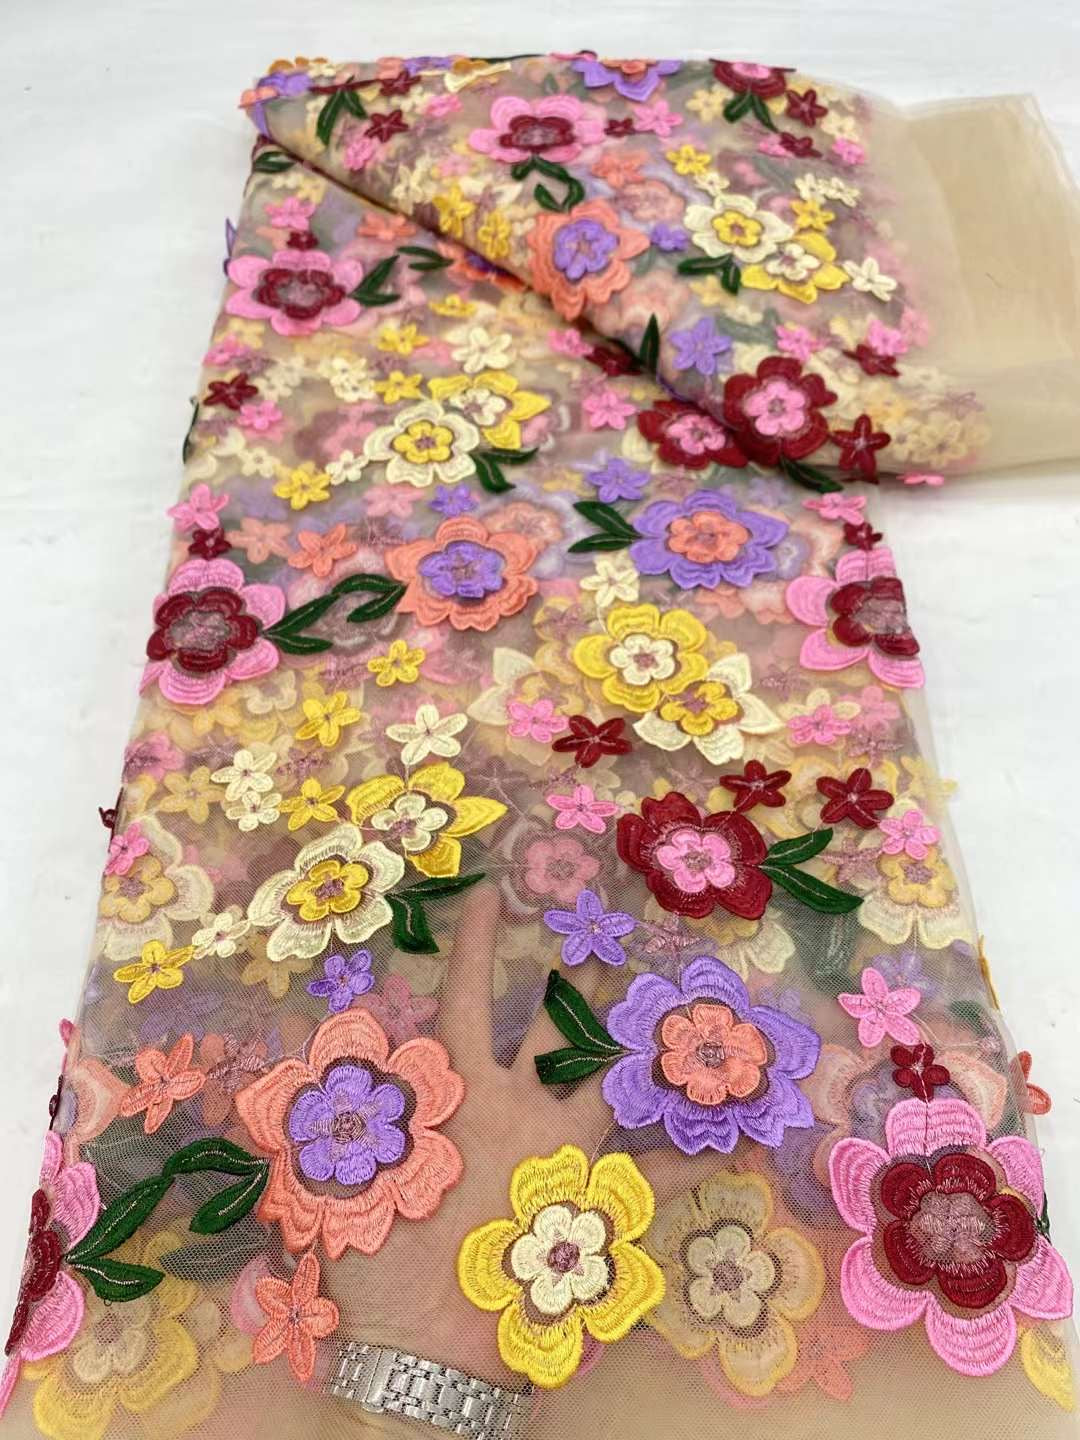 Floral Flowers Fabric - More Colors